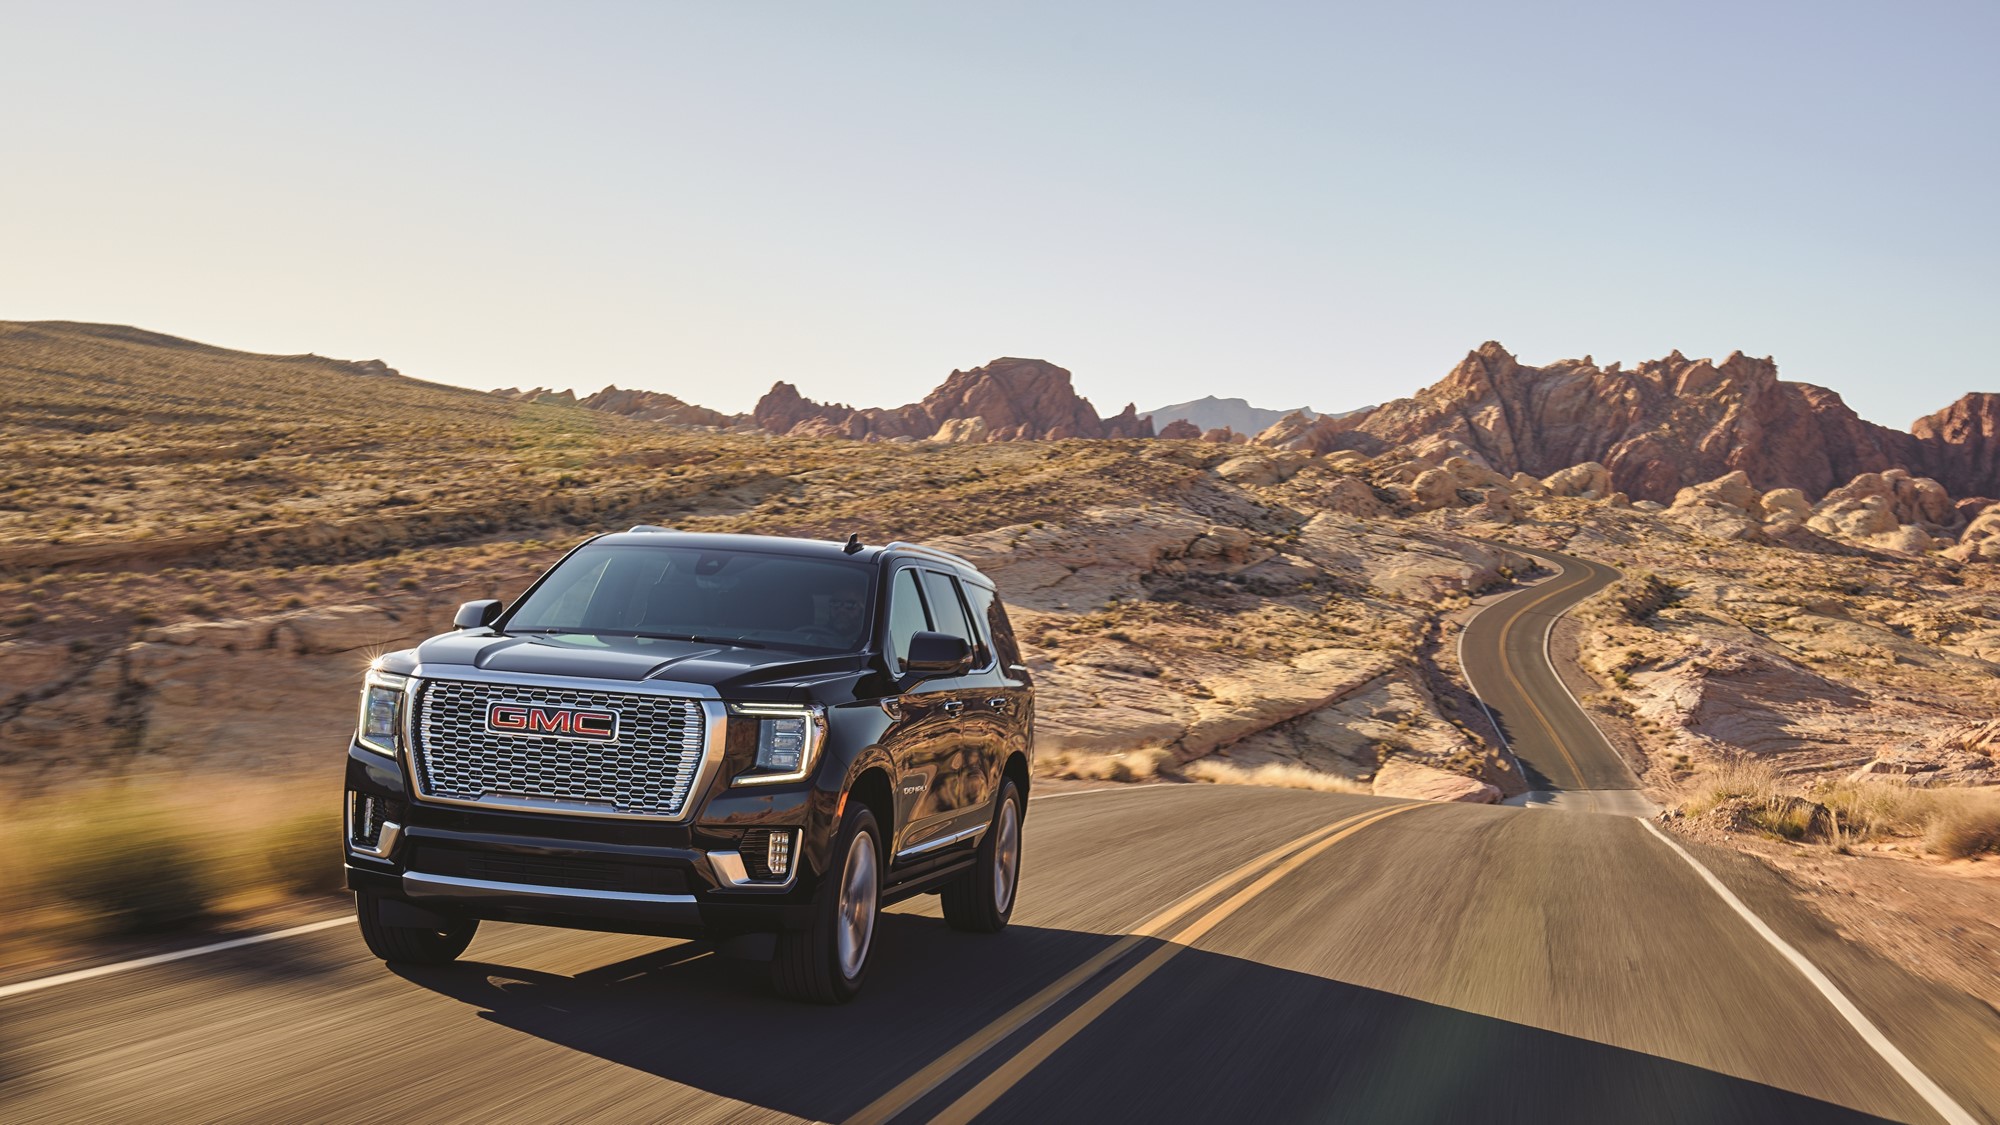 Hit the Road with Confidence this Festive Season with the All-New 2021 GMC Yukon